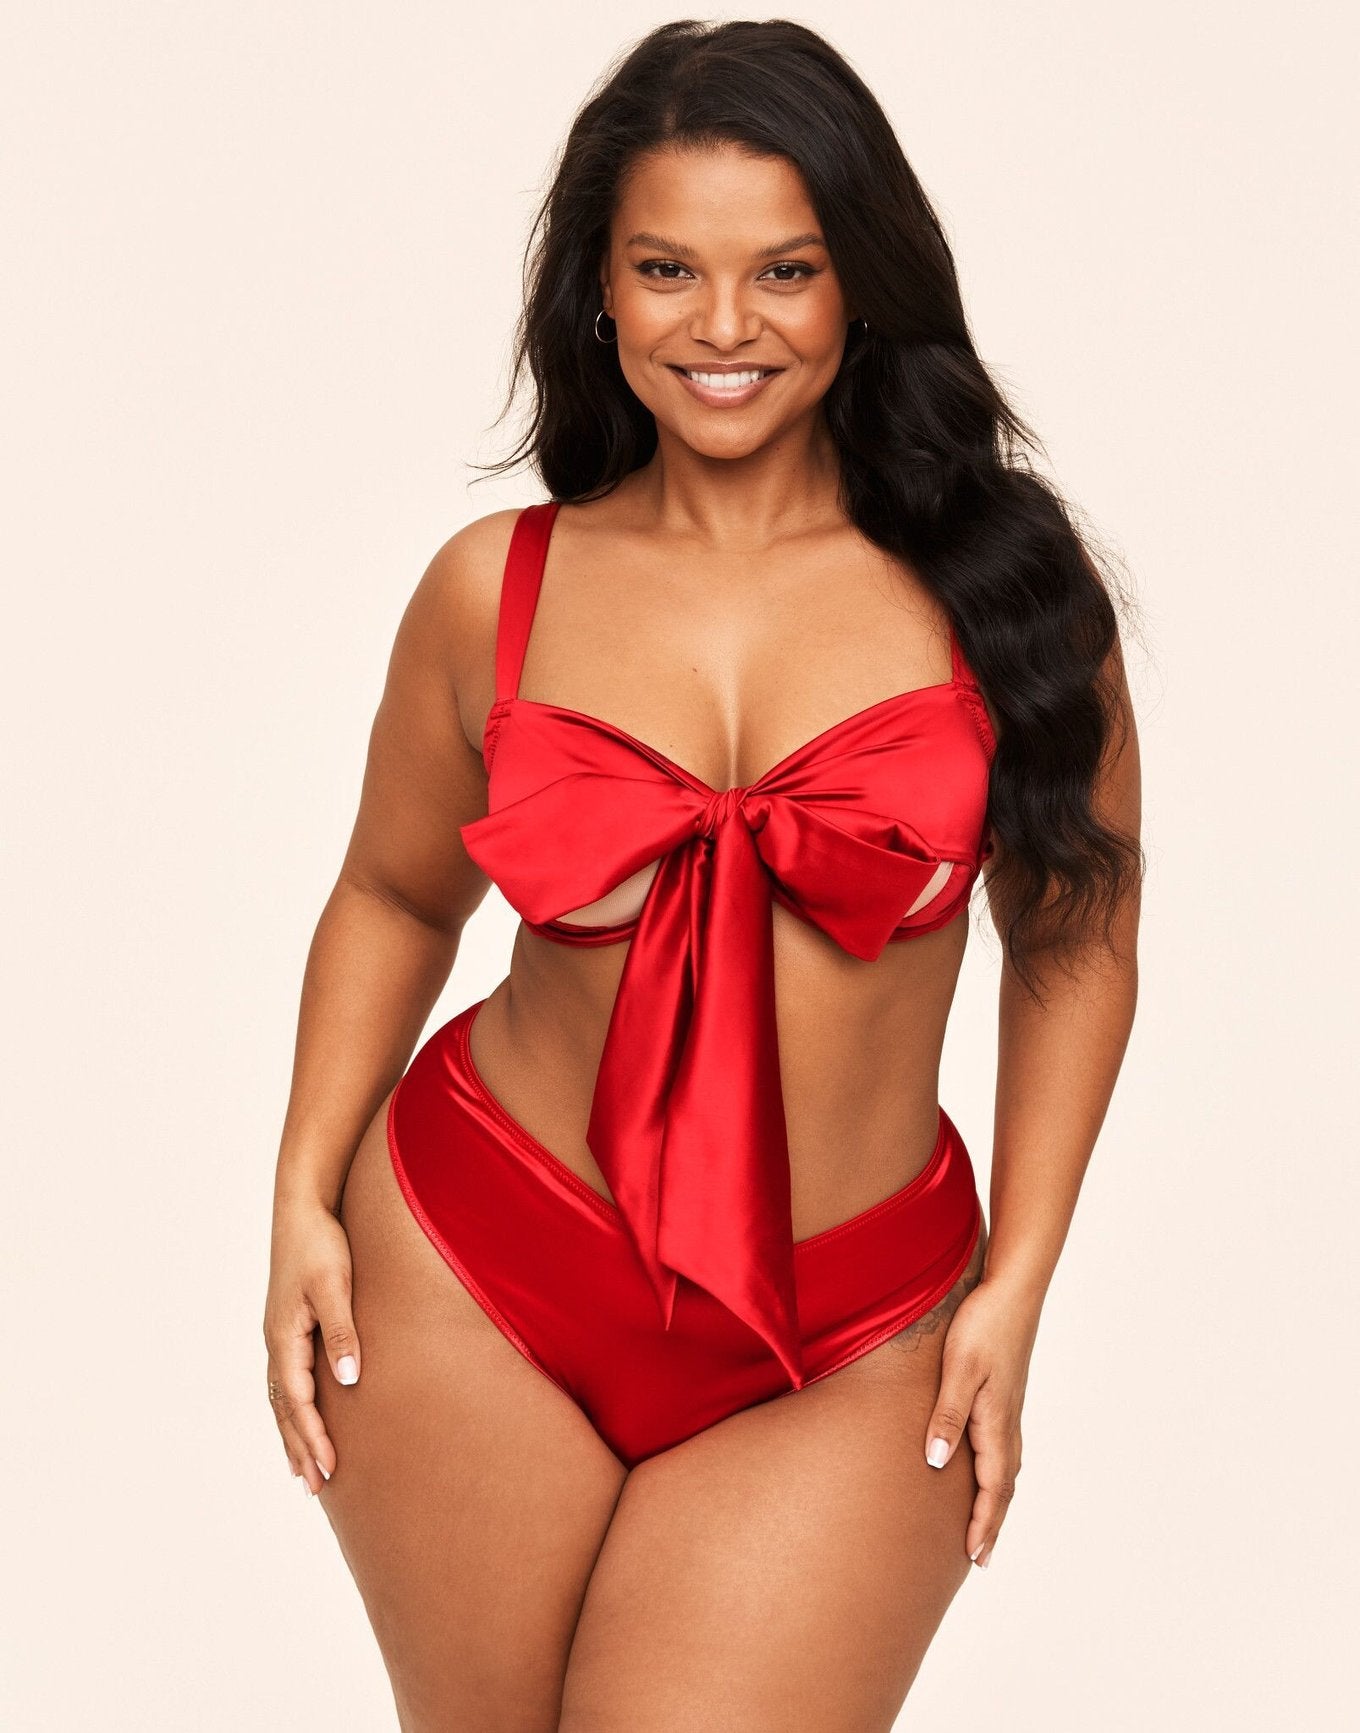 Adore Me Gynger Unlined Balconette in color True Red and shape balconette